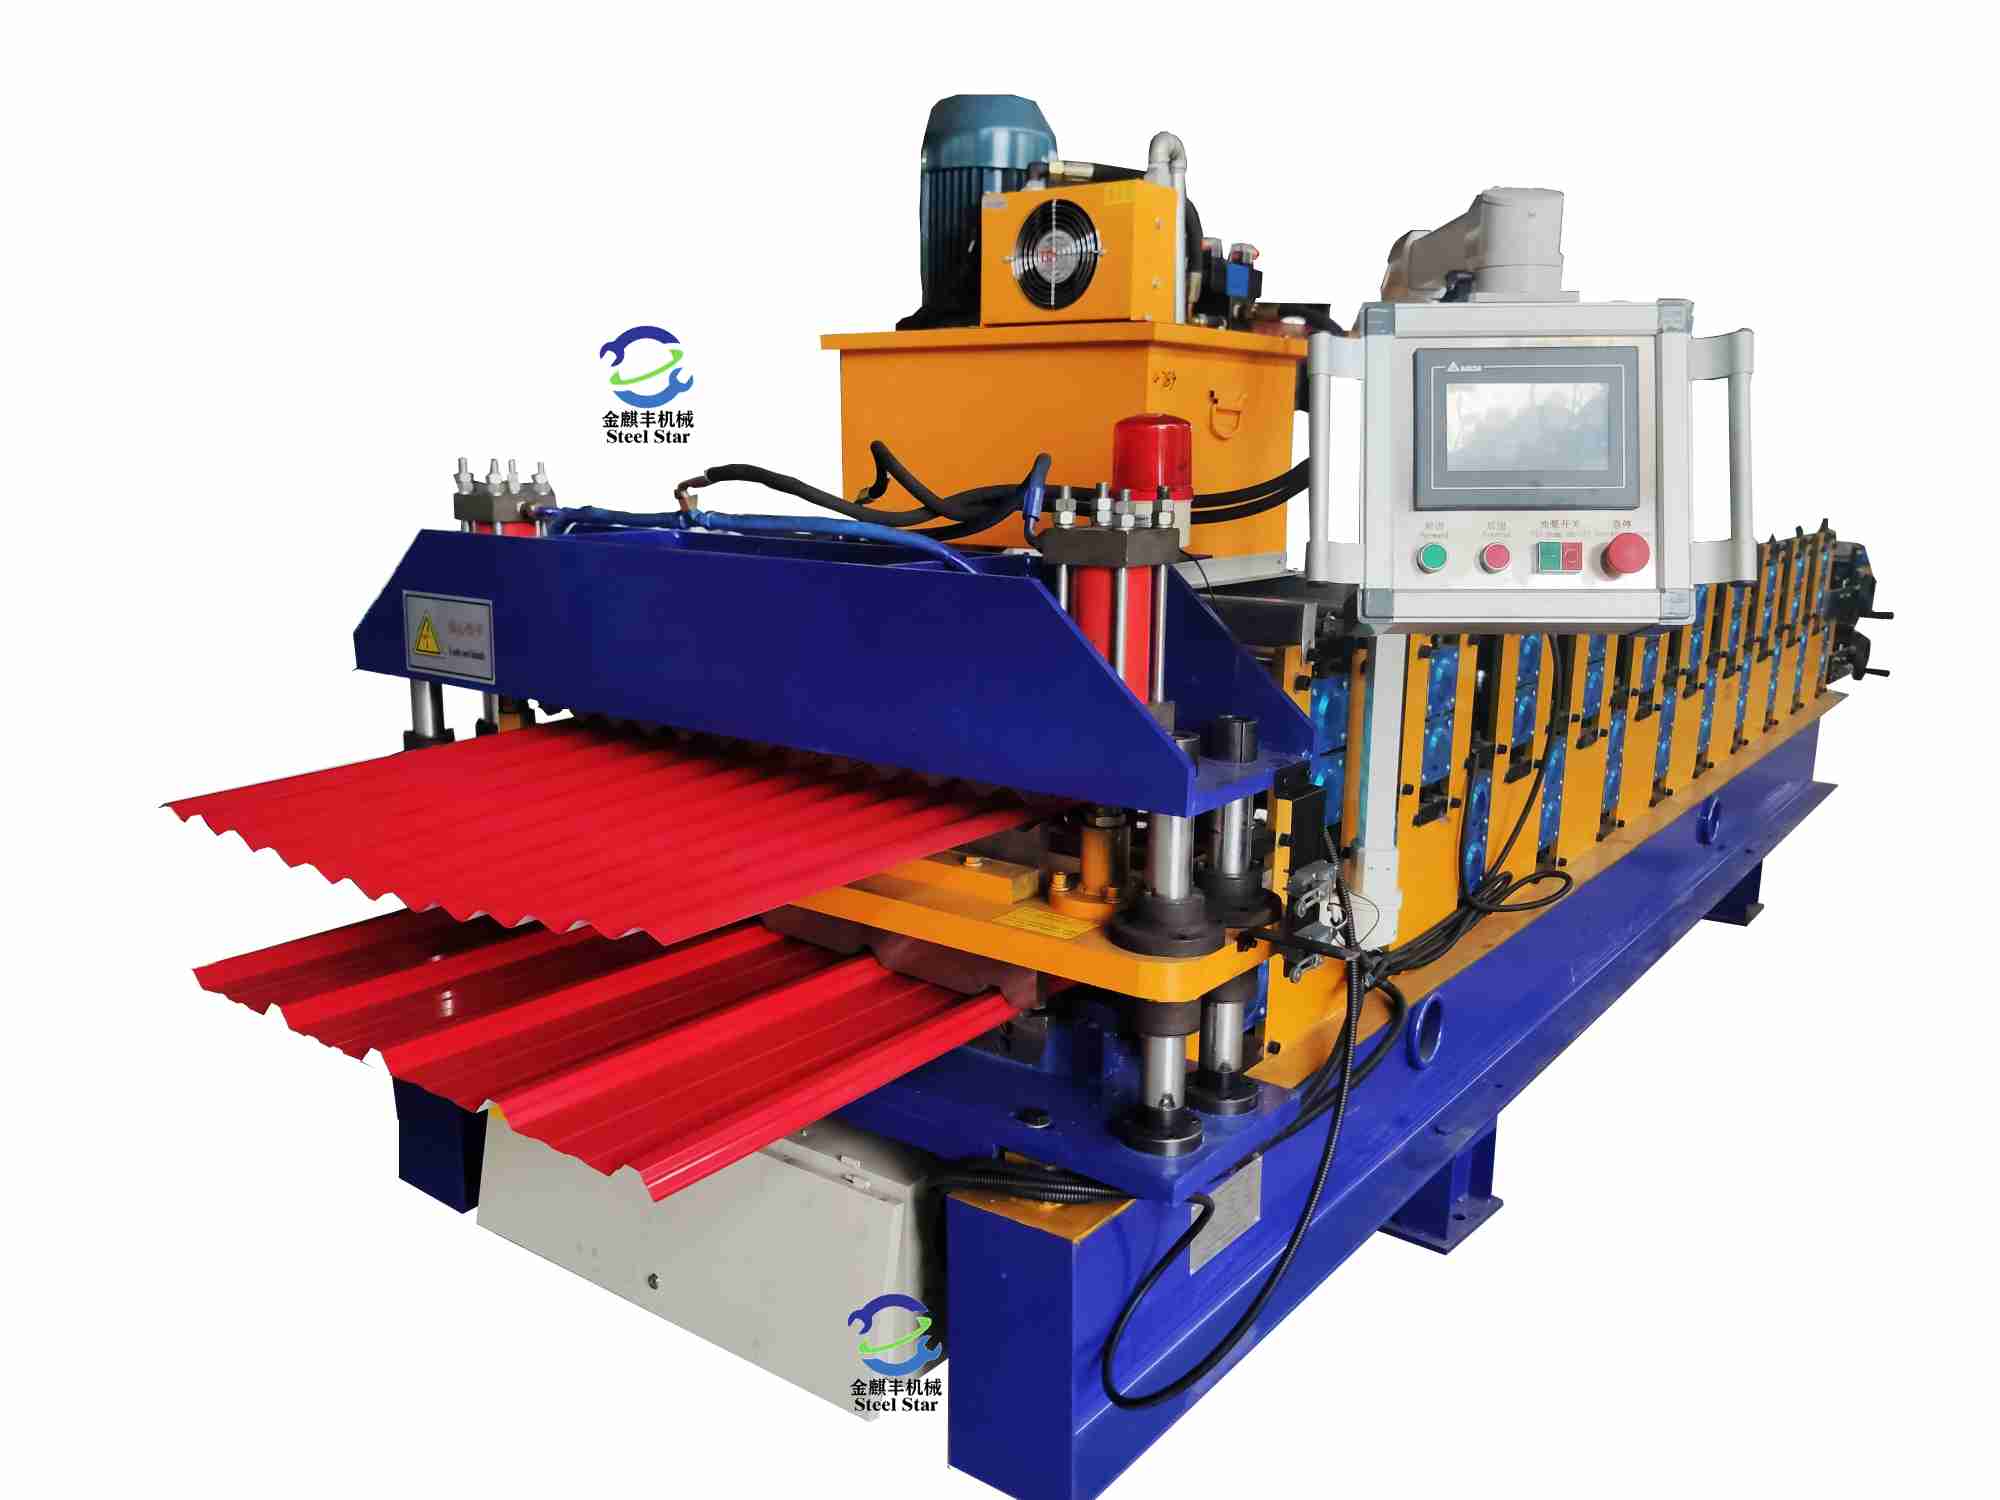 double layer roll forming machine，double models roll forming machine，Double layer/double models trapezoidal+corrugated high speed roof sheet roll forming machine,space-saving,cold roll forming machine，he double forming machine is used for forming metal sheets, such as aluminum, wood, plastic, and paper products，What is the purpose of a roll forming machine?
What is the speed of roll forming machine?
What is the process of roll forming?
How does a forming machine work?Double-layer roofing roll forming machine，Double Layer Roofing Sheet Roll Forming Machine，Double layer IBR and corrugated roofing sheet roll forming machine，Double Layer Roofing Sheet Roll Forming Machine，Double Layer Forming Machine ，A roof double layer roll forming machine ，Double layer roofing sheet roll forming machine ，double layer roof wall panel roll forming machine